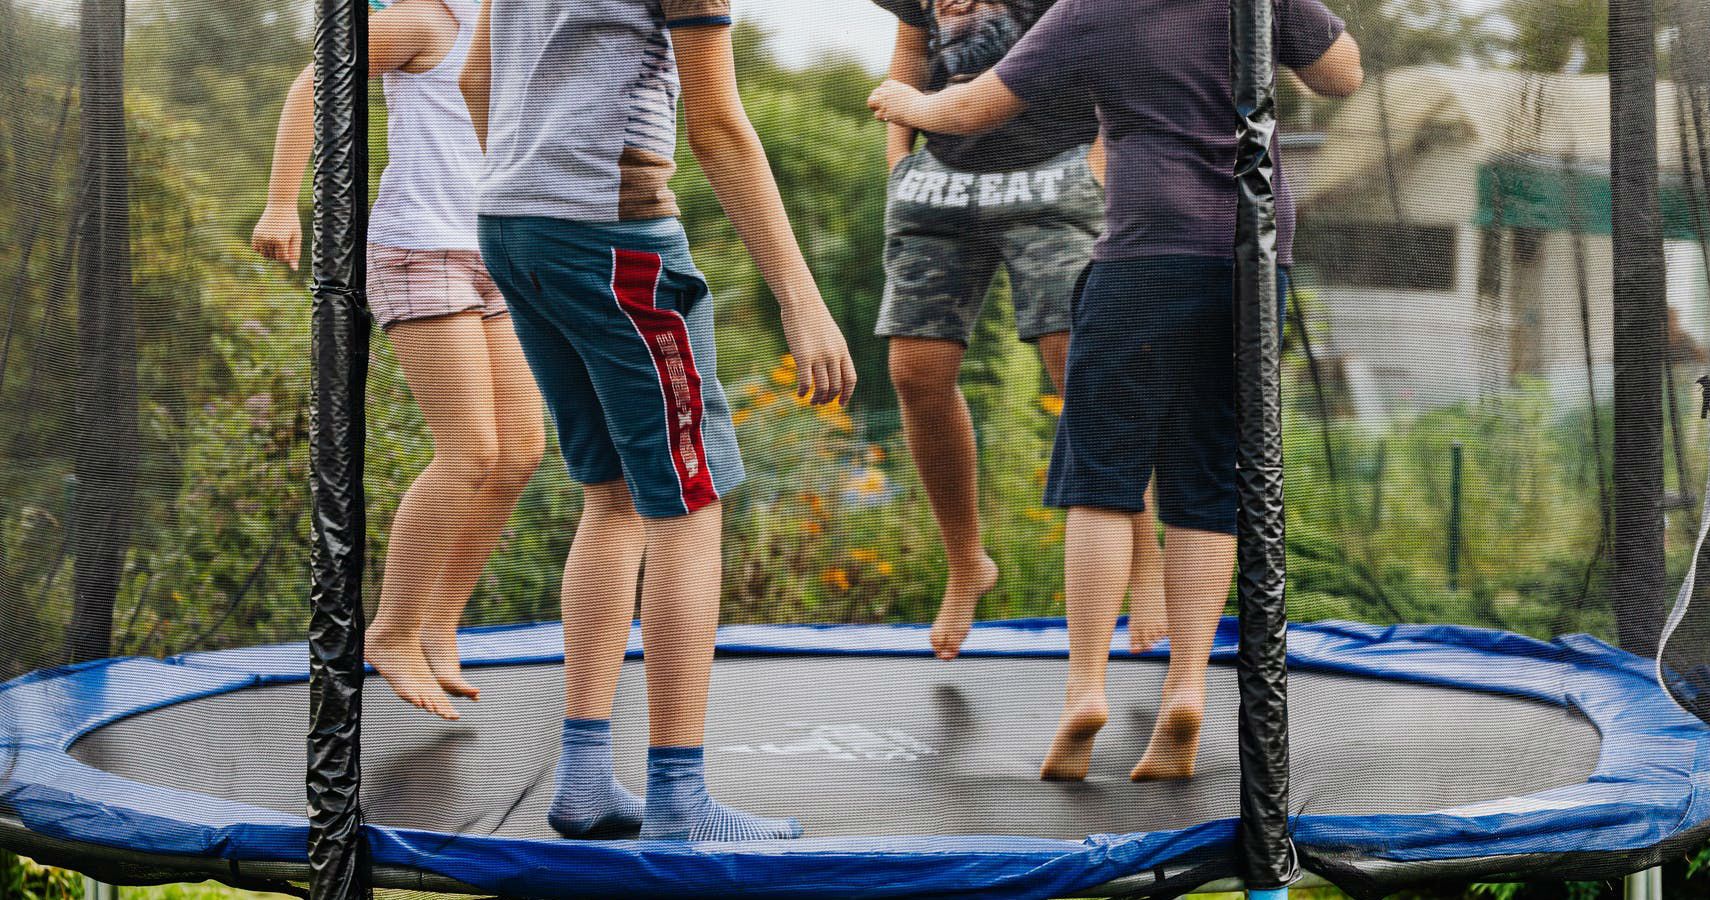 Why parents should be cautious about young kids and trampoline parks, Novant Health